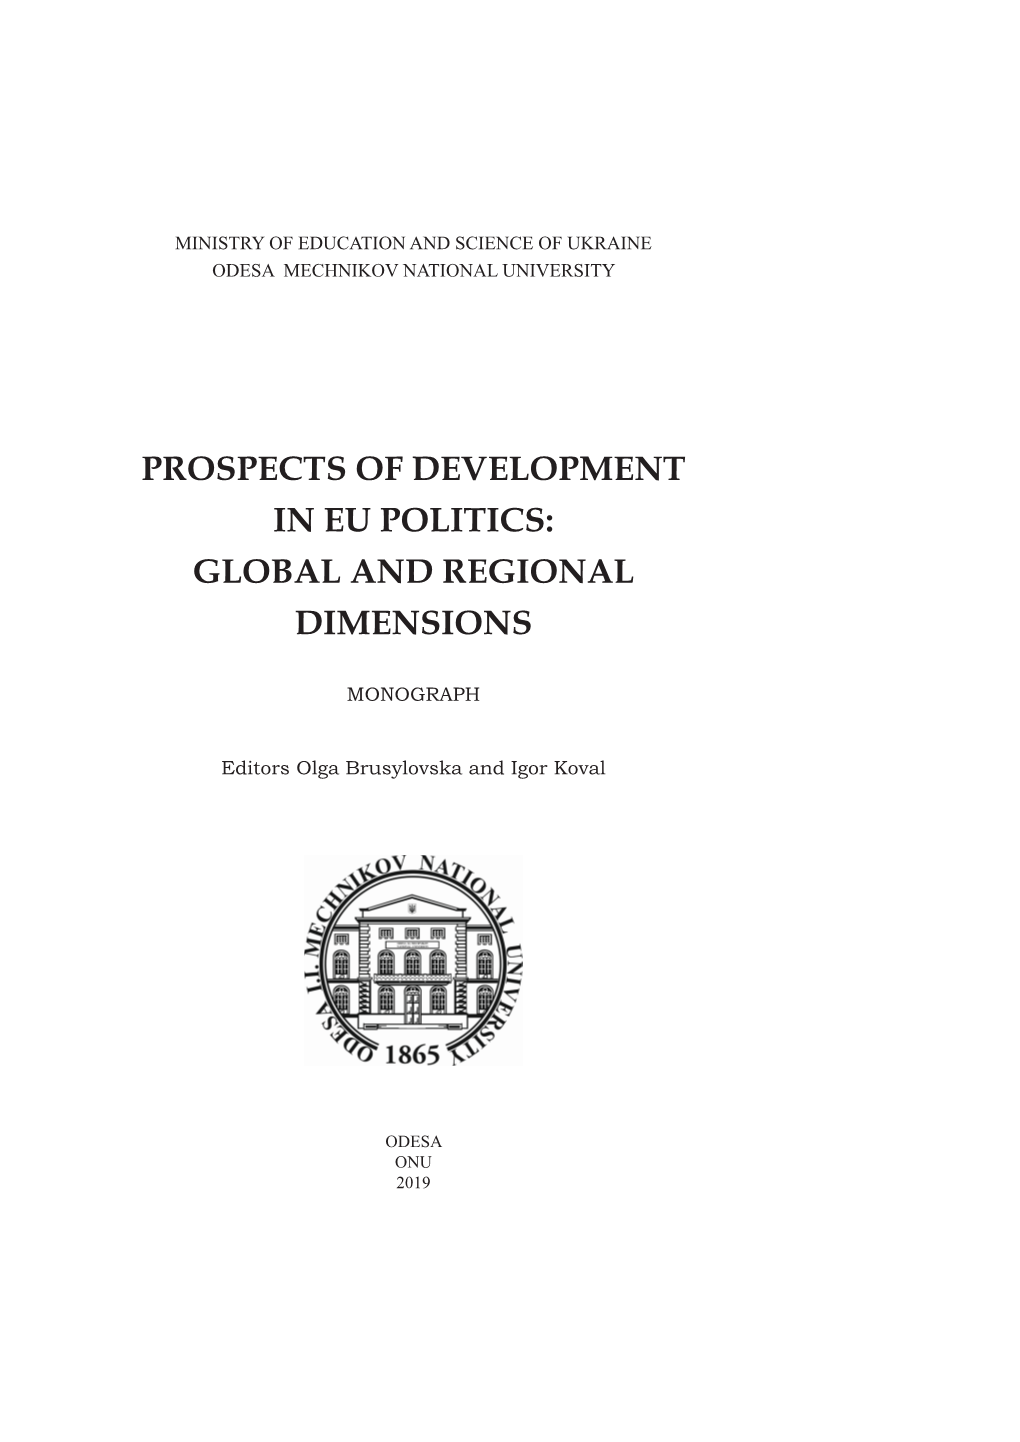 Global and Regional Dimensions